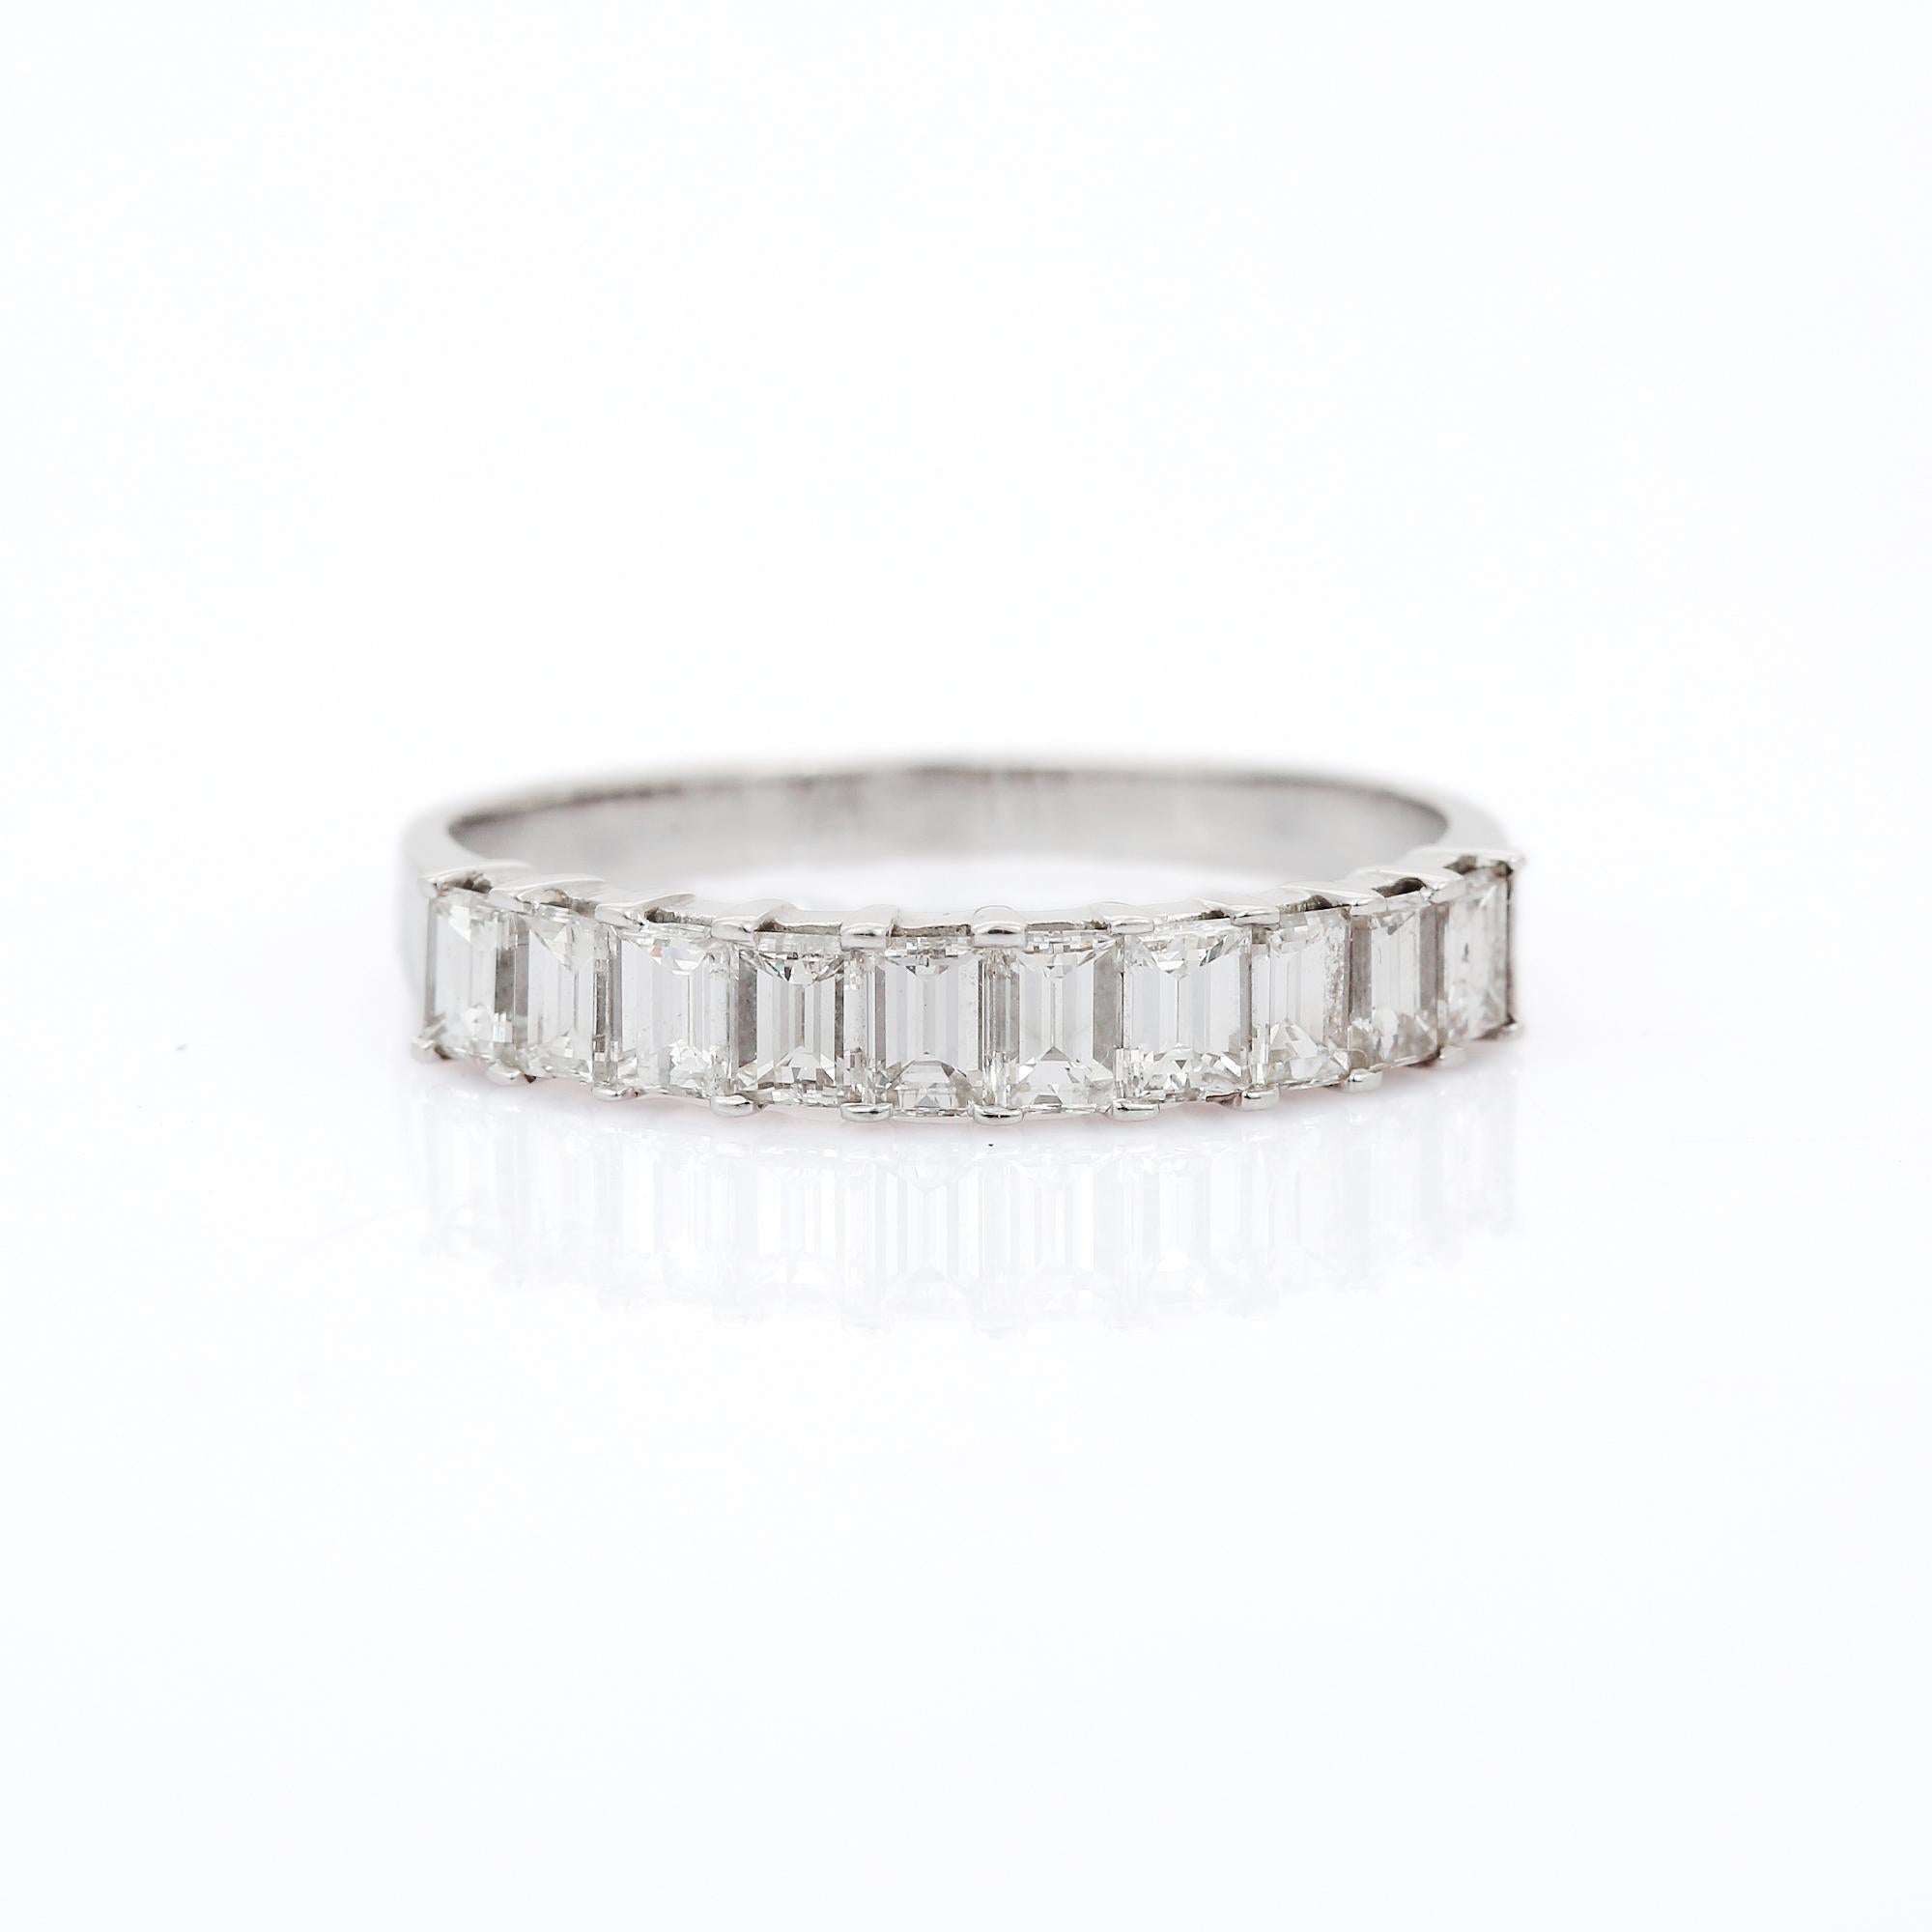 For Sale:  1.25 Carat Emerald Cut Diamond Half Eternity Band Ring in 18K White Gold  4